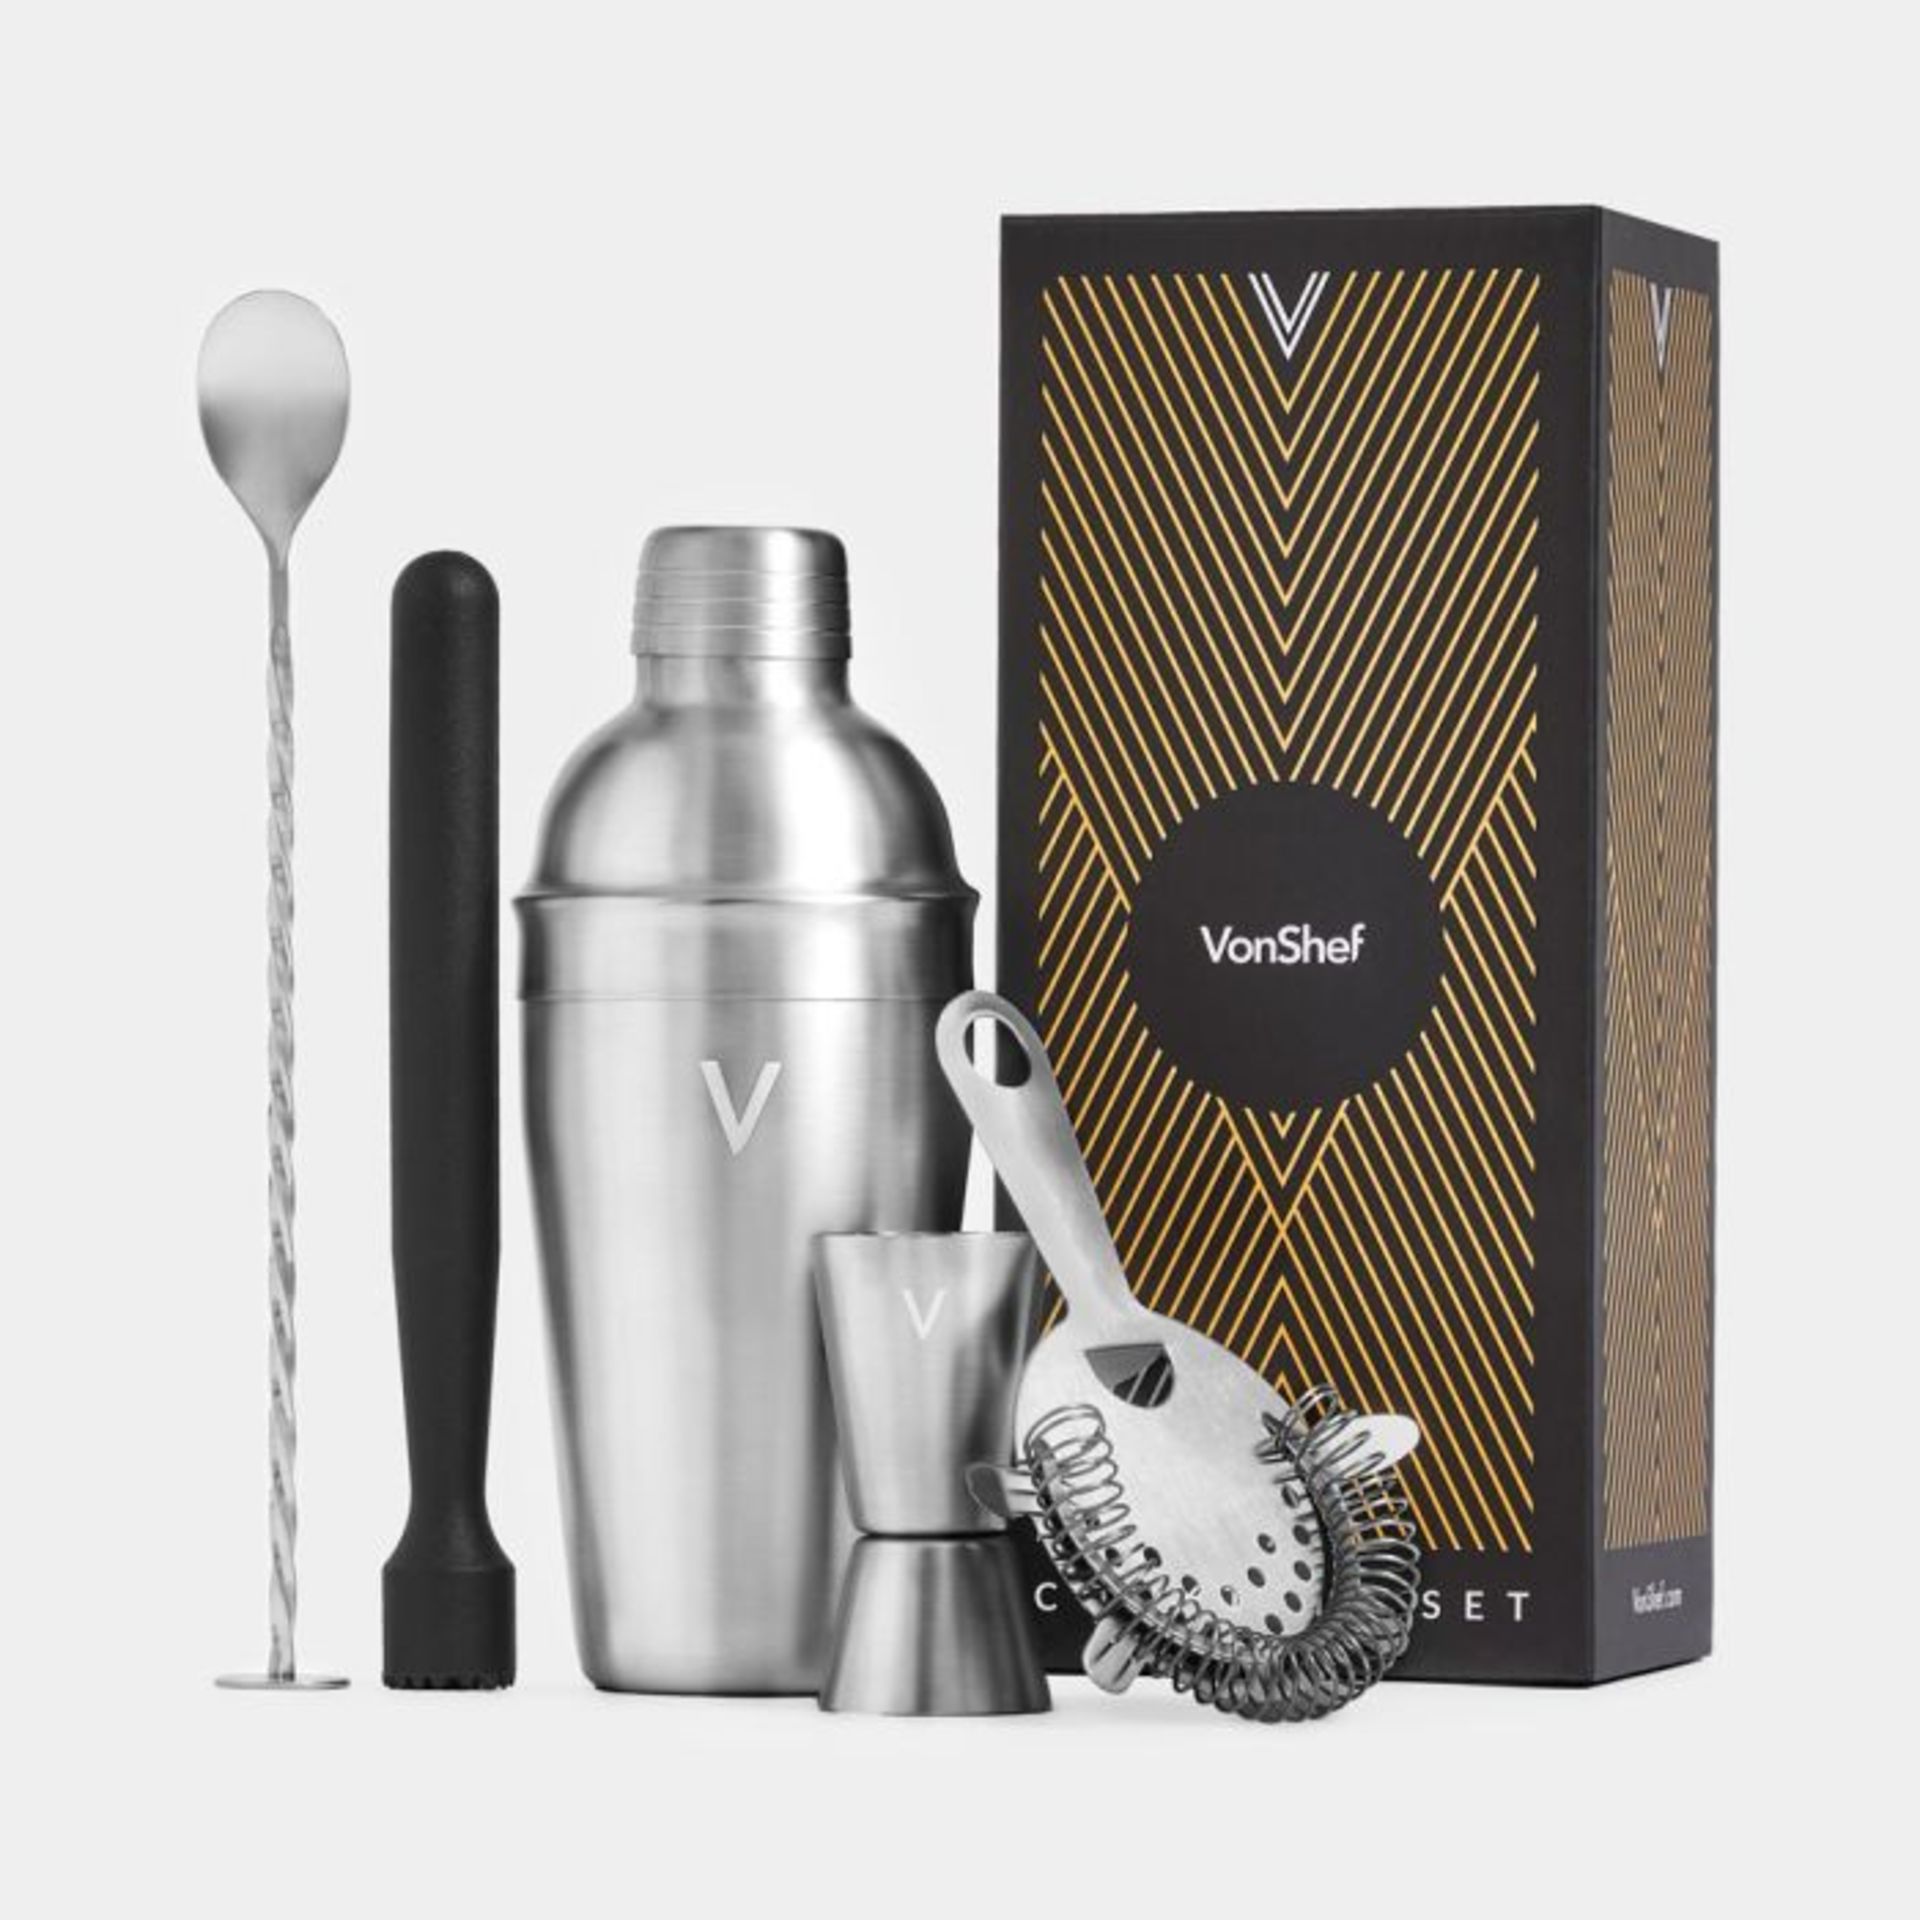 Manhattan Silver Cocktail Set 5pc. - ER51. Conquer the cocktail world with our cocktail making